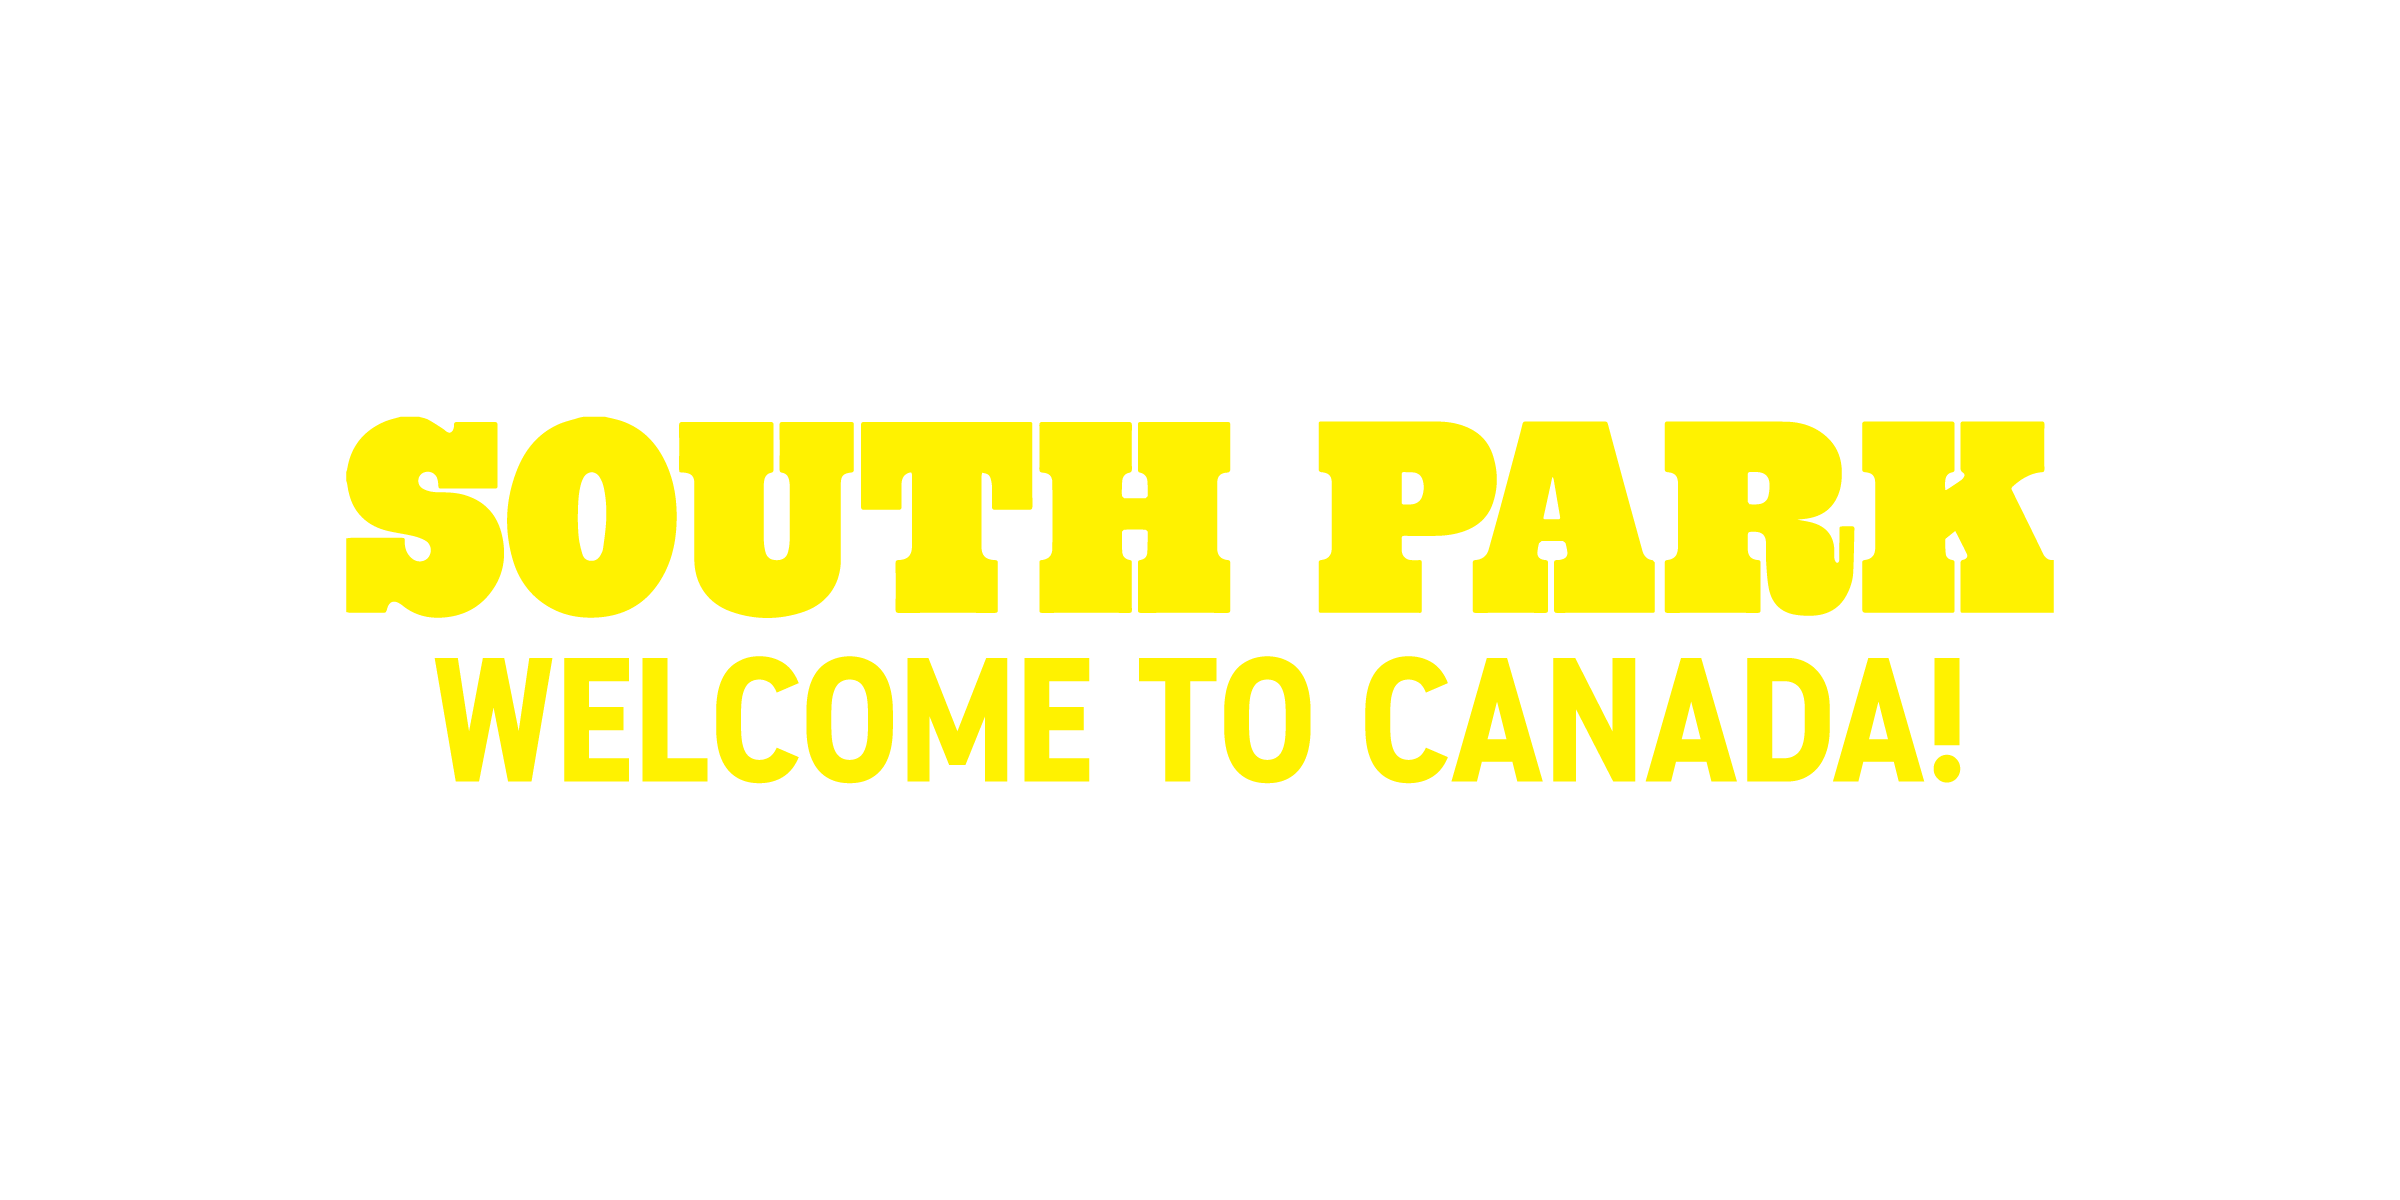 South Park: Welcome to Canada!